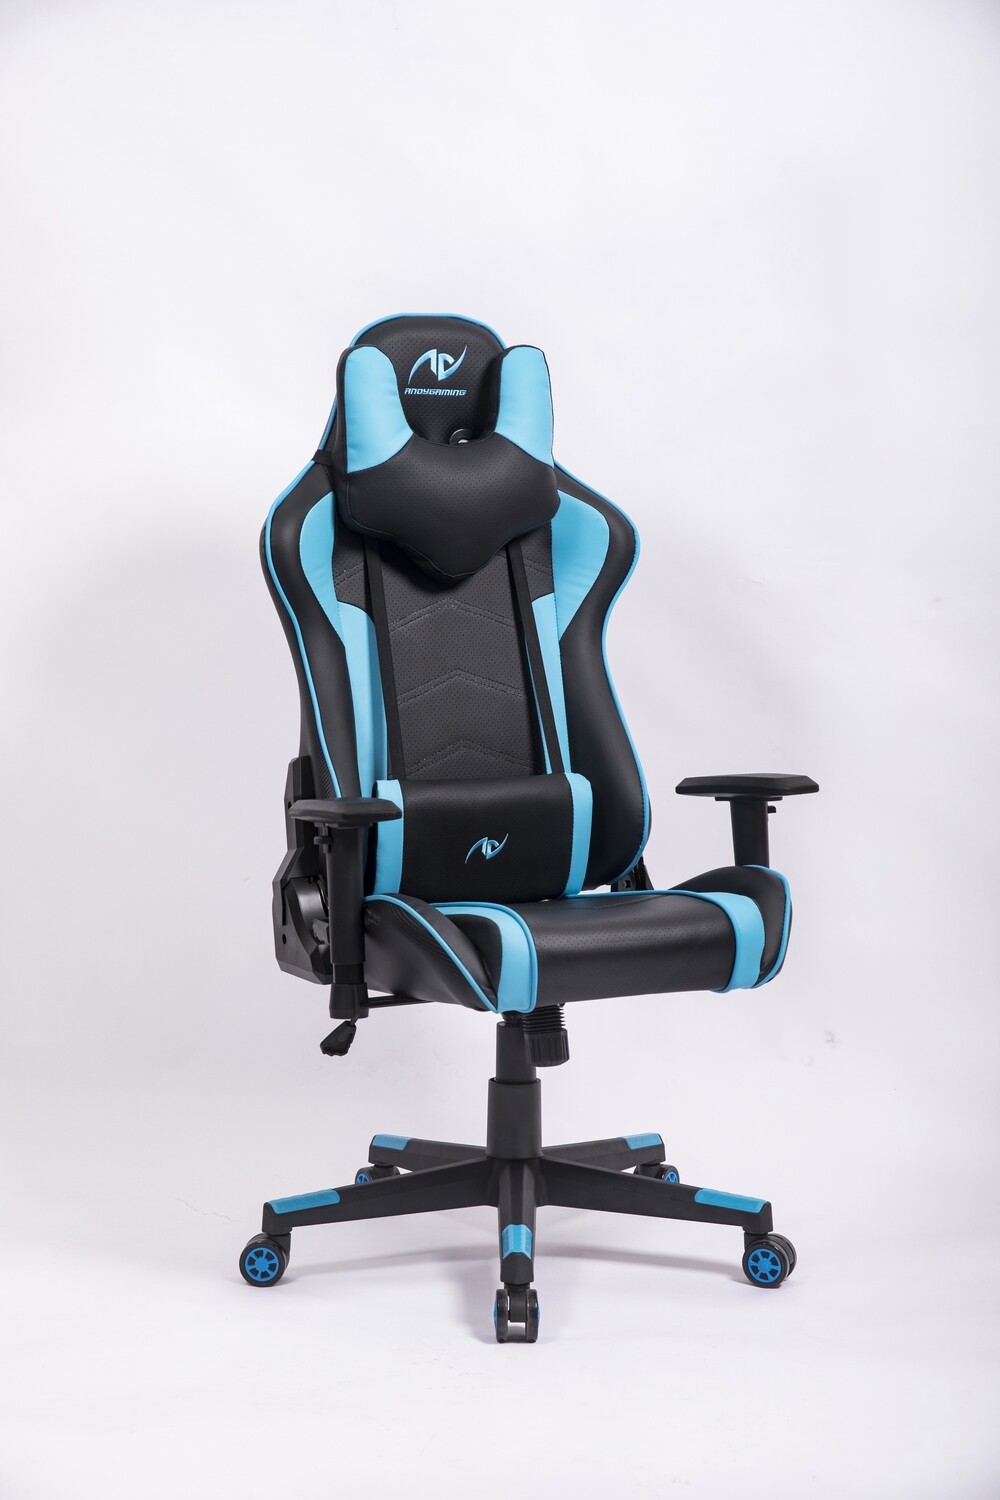 AndyGaming Blue Gaming Chair